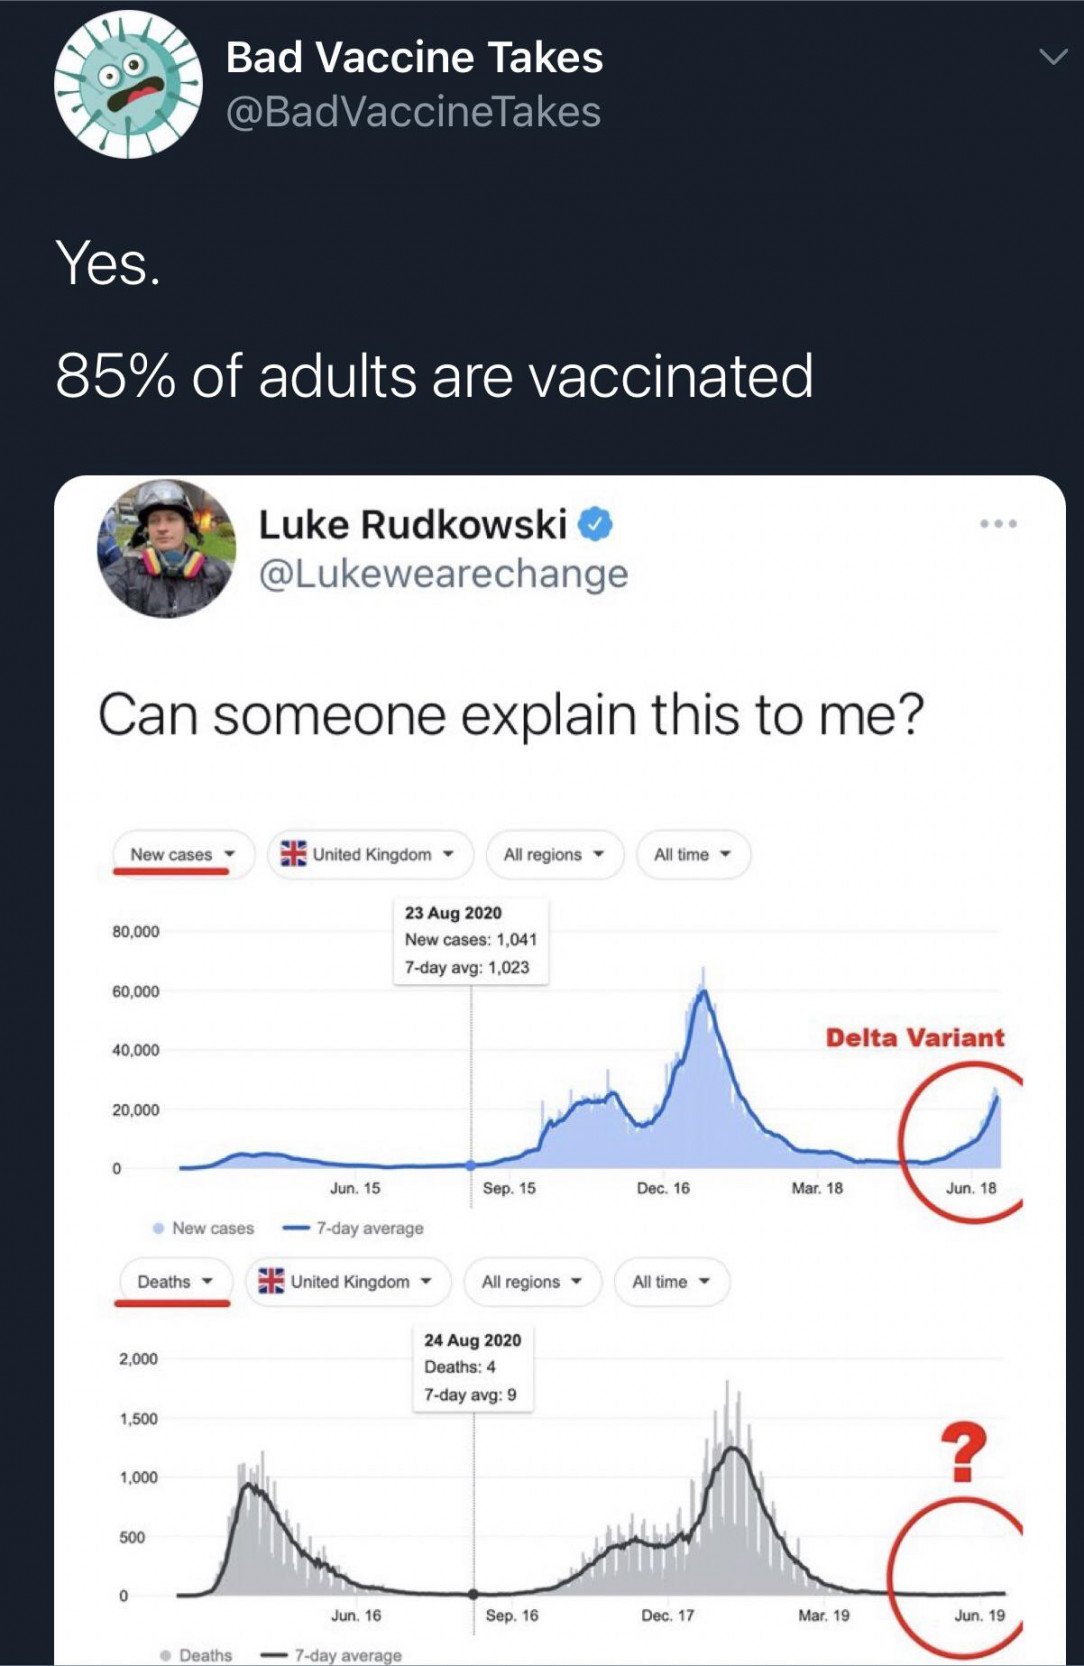 Wow! Vaccines work!